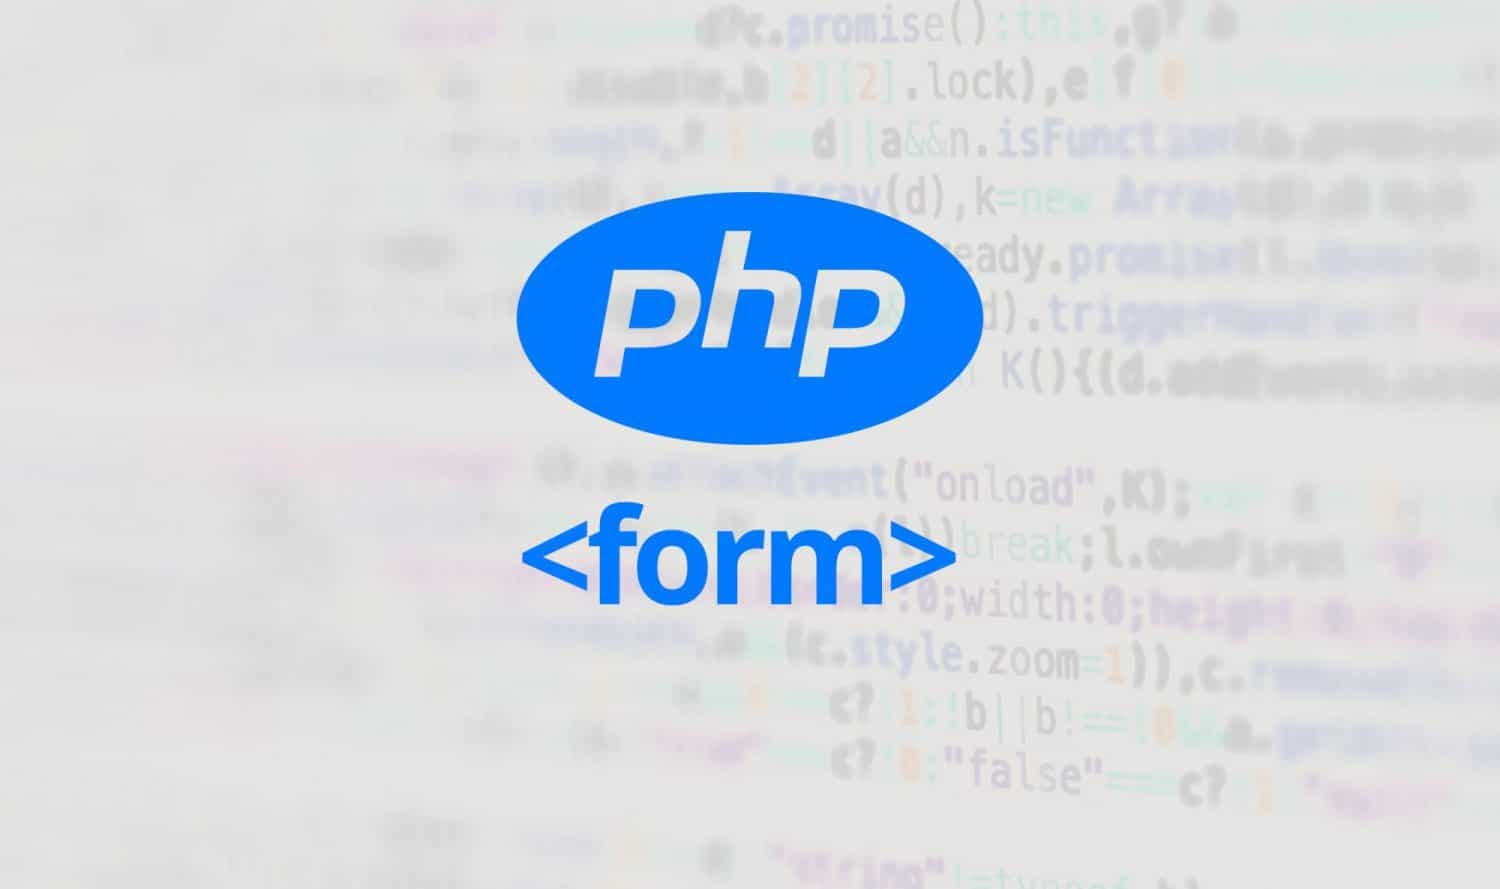 How do I send an HTML form to an email address using PHP?